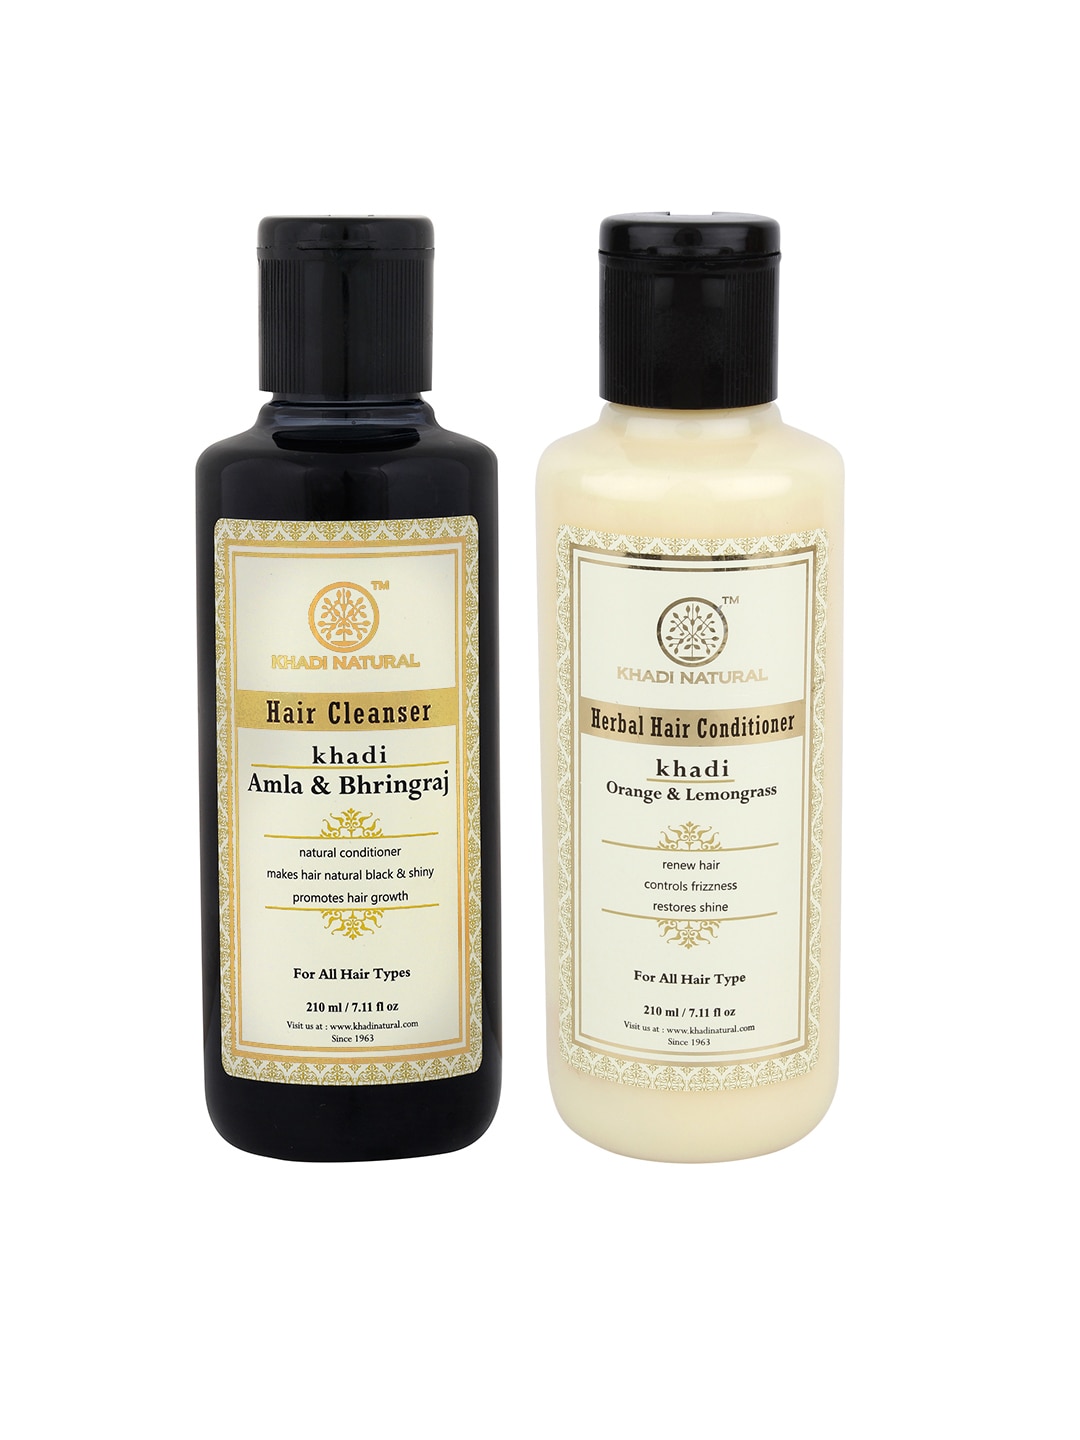 Khadi Natural Unisex Set of Hair Conditioner & Hair Cleanser Price in India